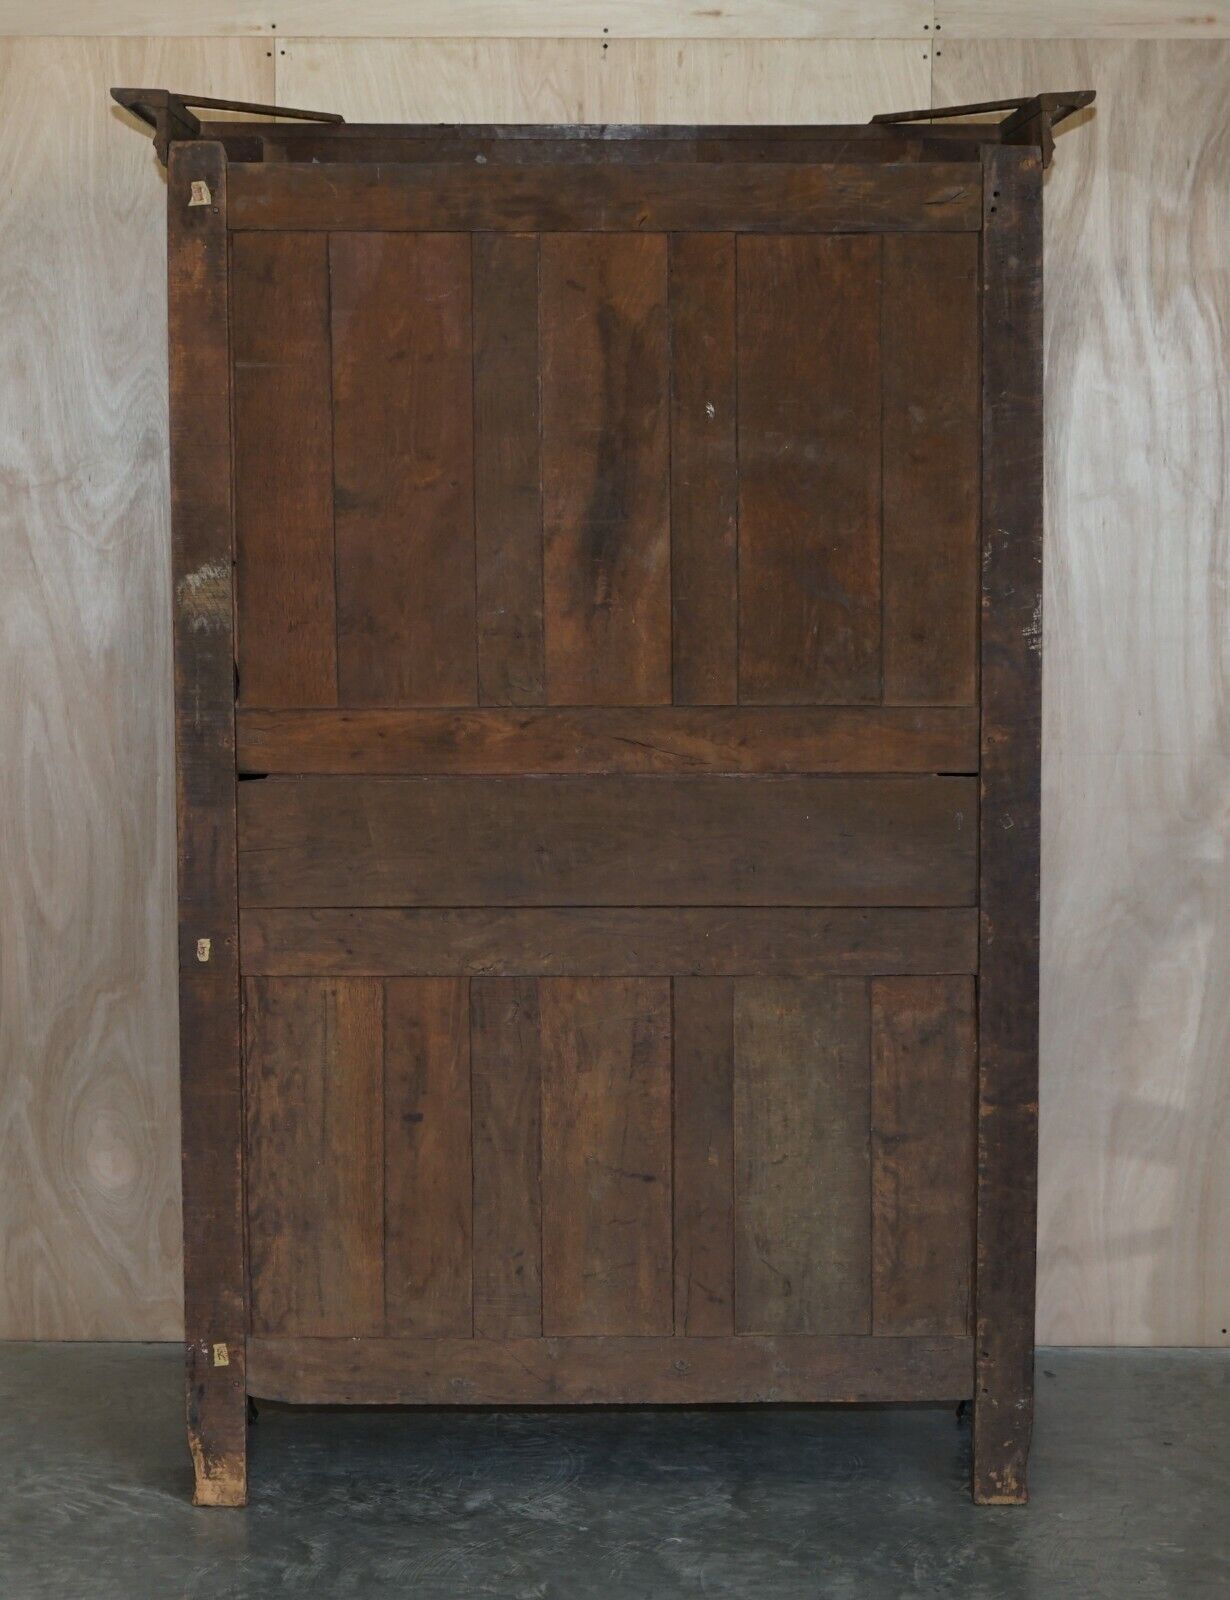 ANTIQUE 1844 CARVED & DATED LARGE WARDROBE ARMOIRE WITH EXPERTLY